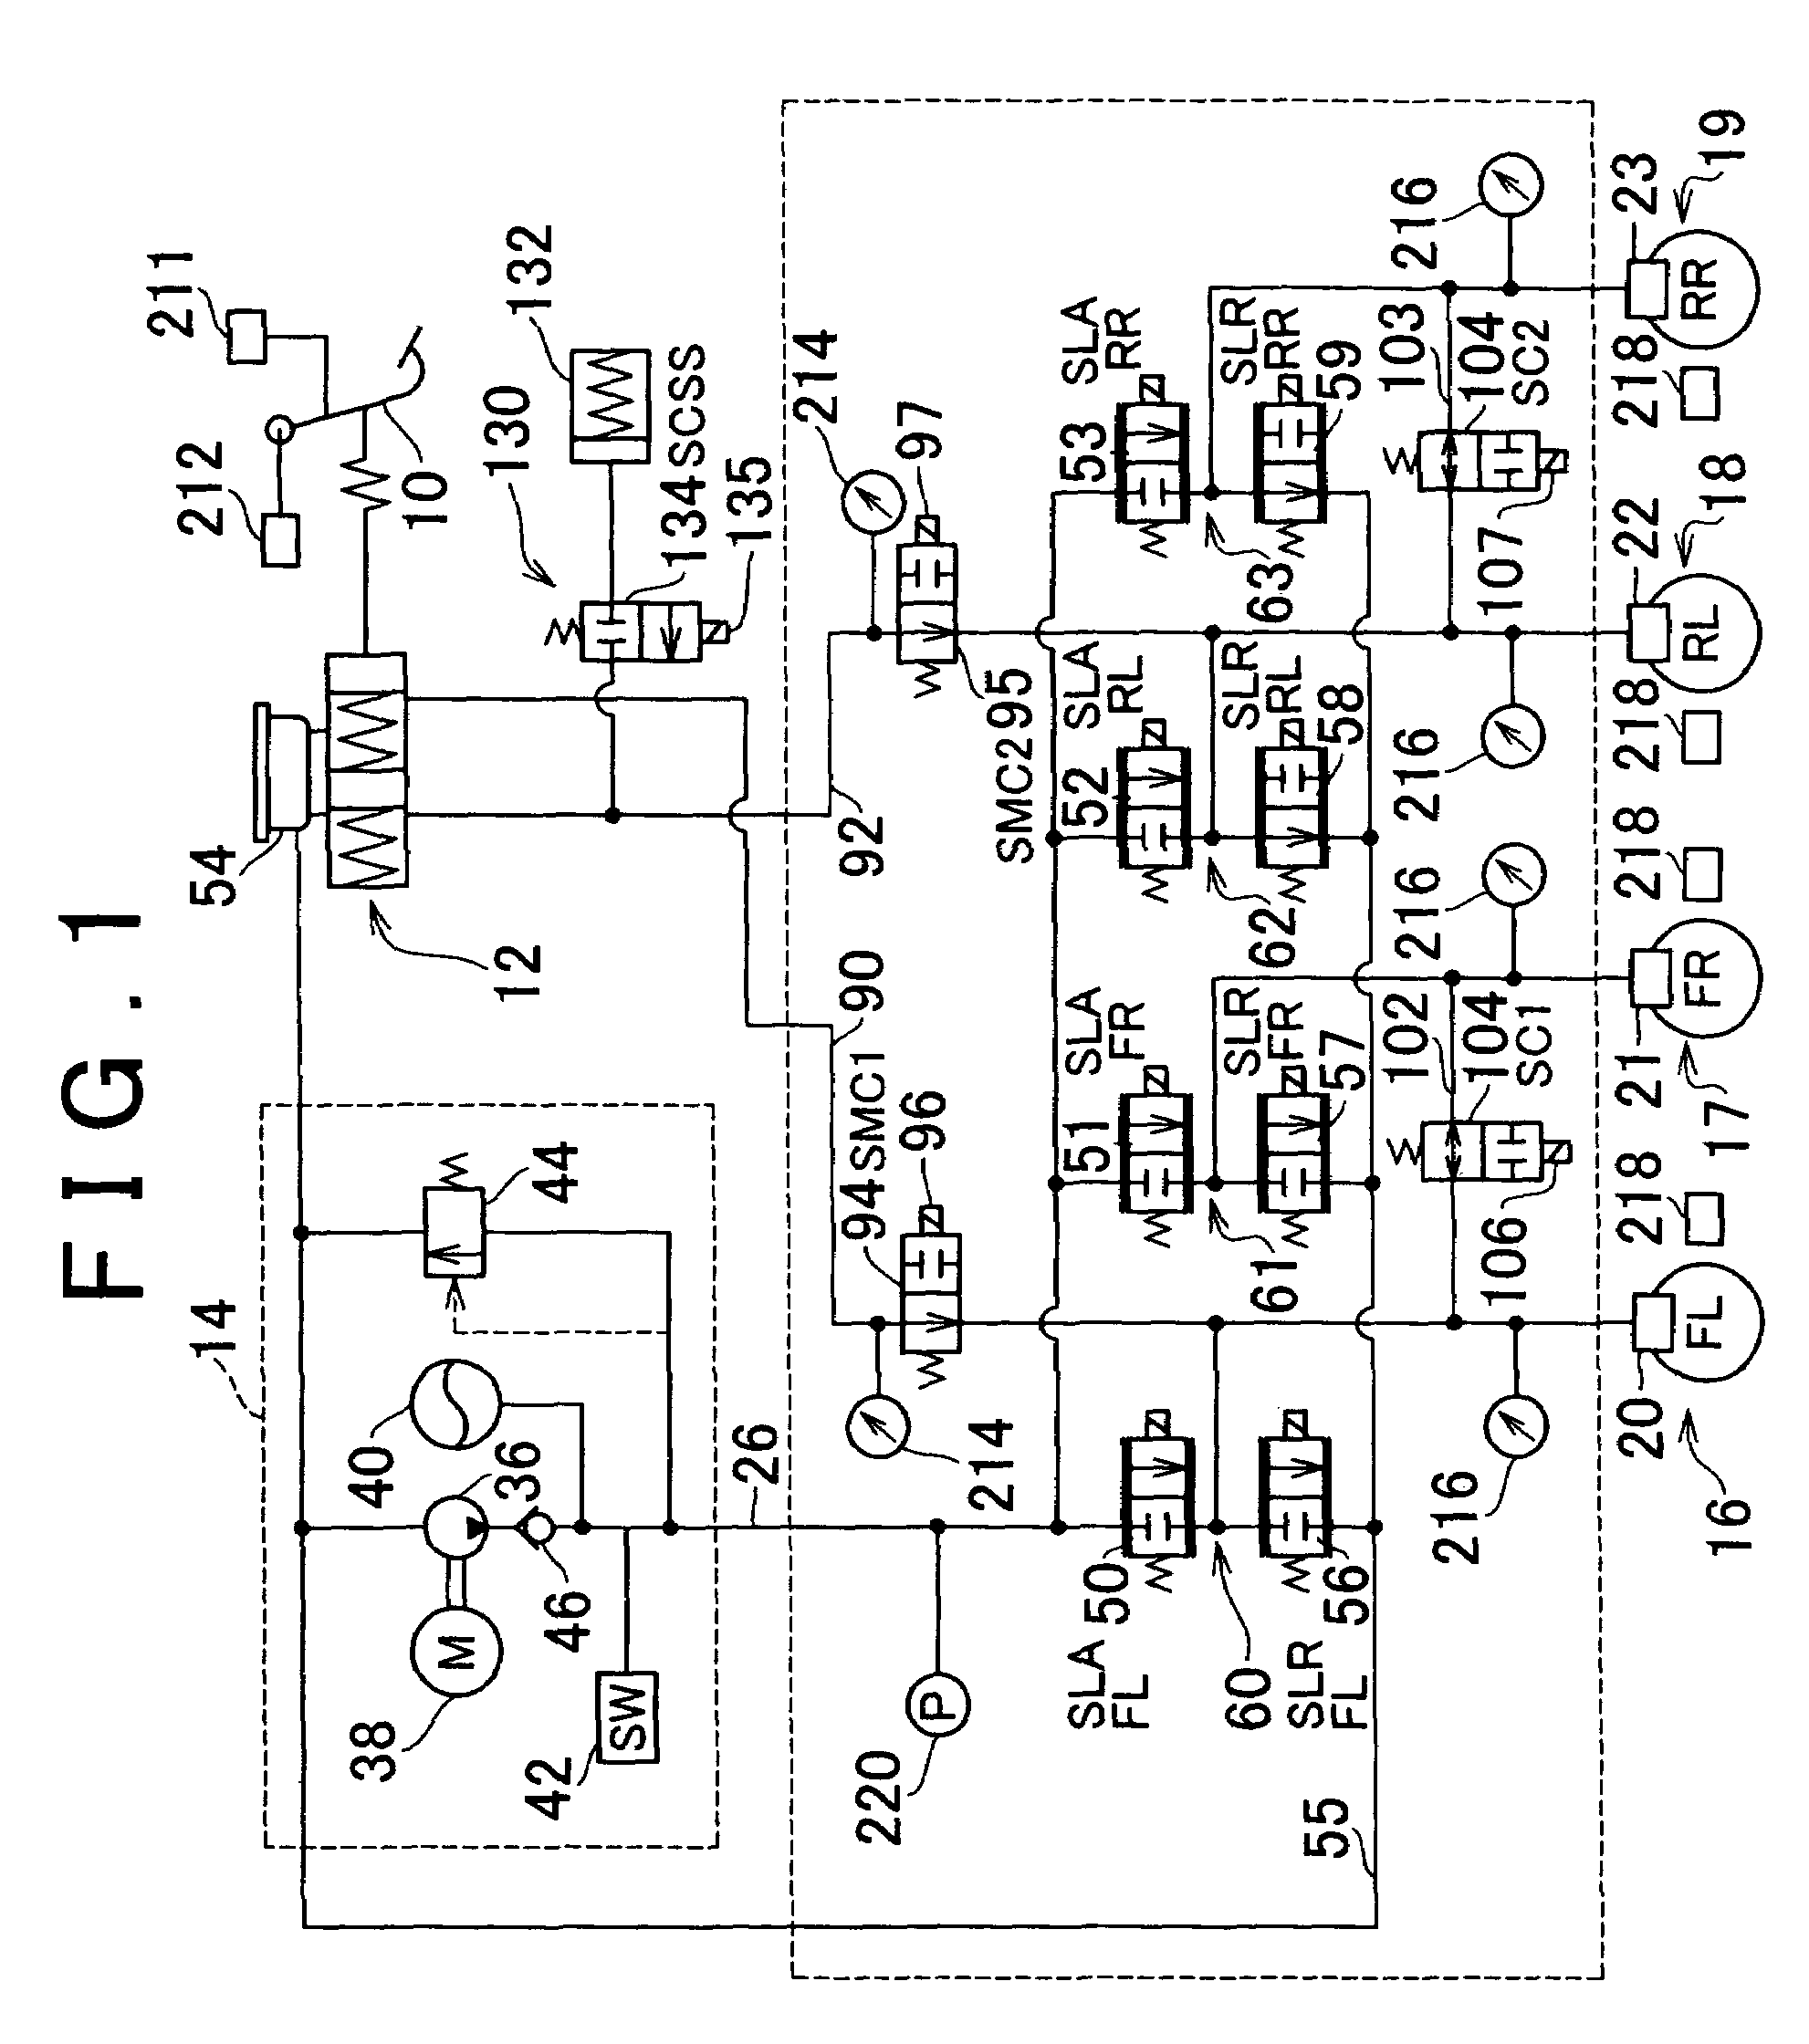 Electromagnetic valve control device and method